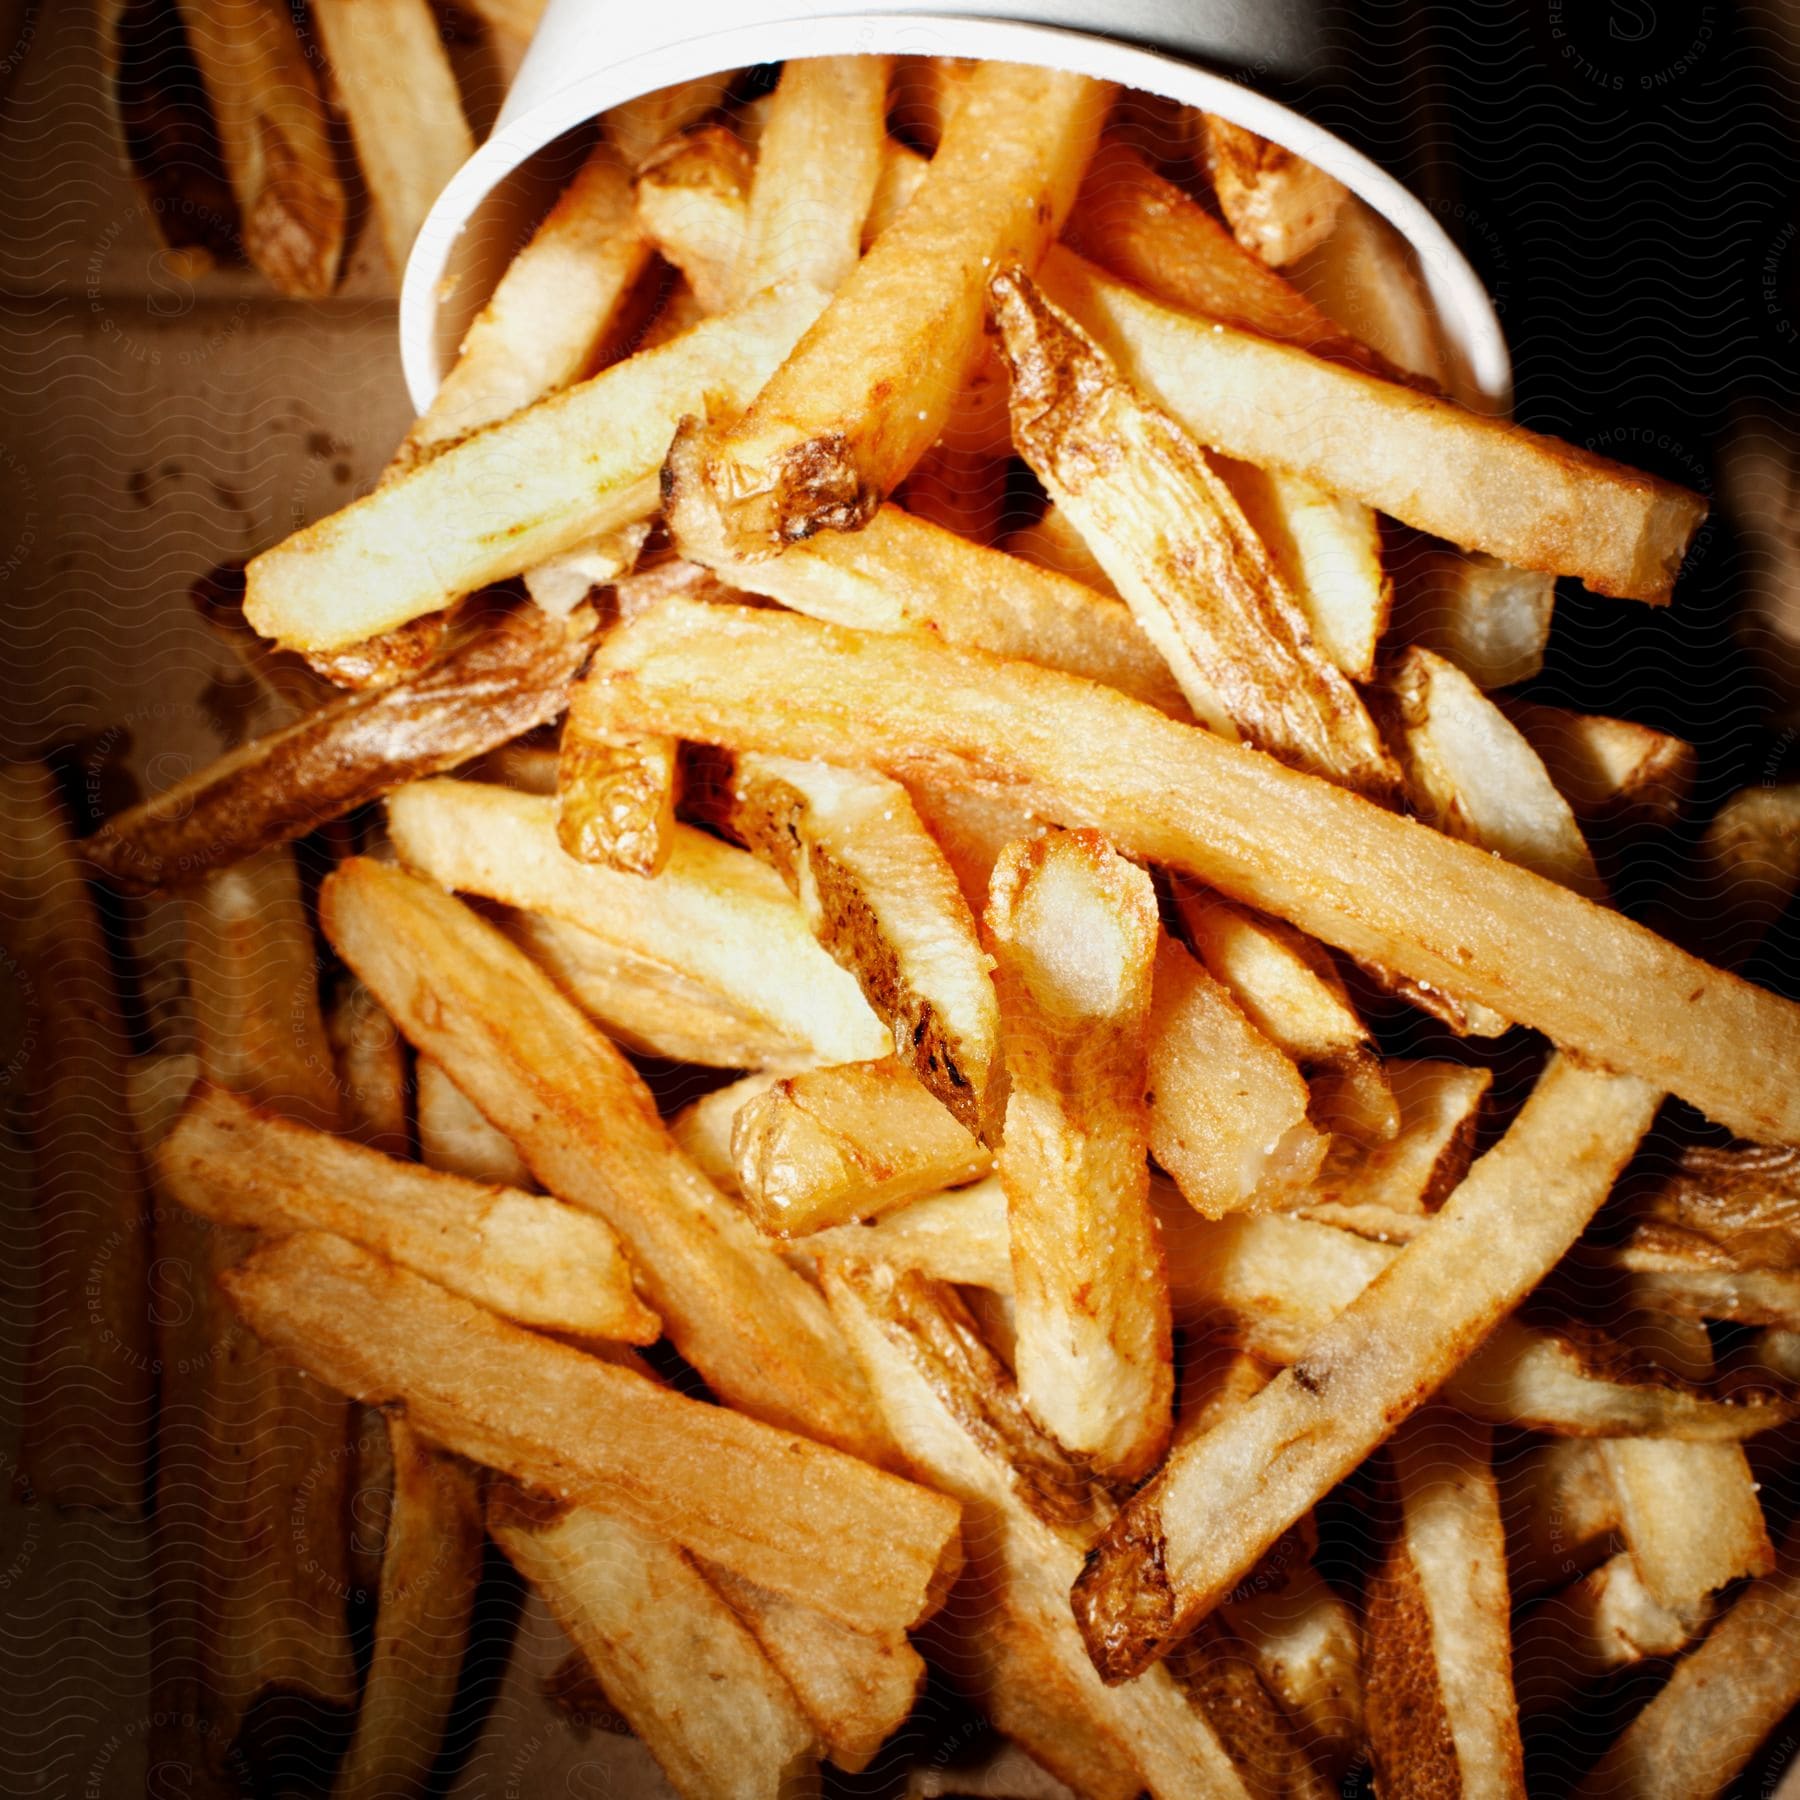 A cascade of golden brown fries spills out of a paper cup and into a brown paper bag